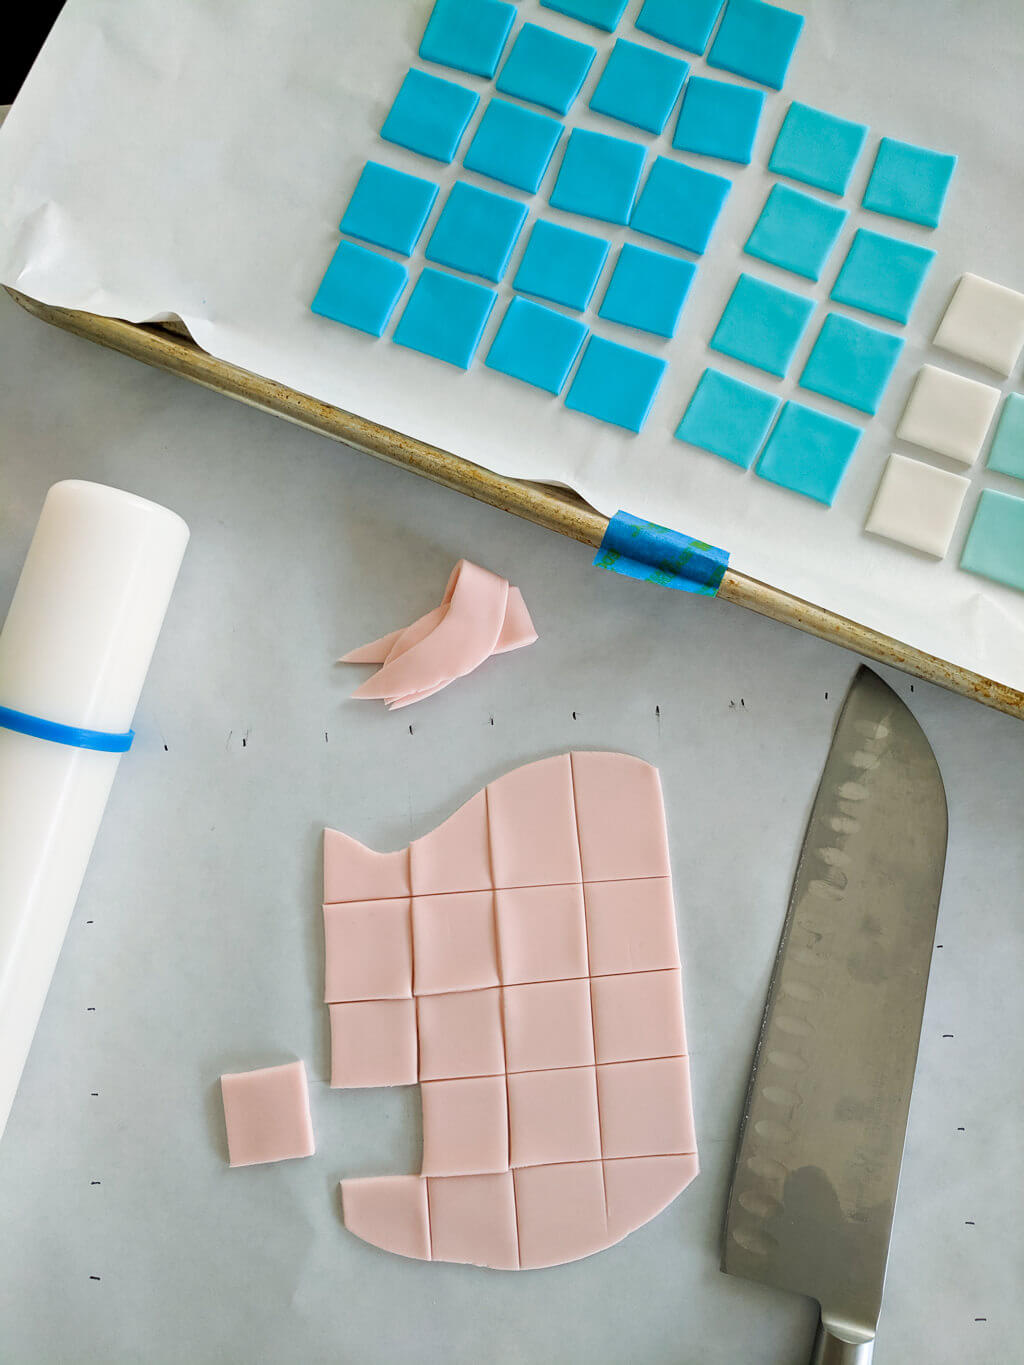 Cutting fondant squares for an easy Minecraft birthday cake